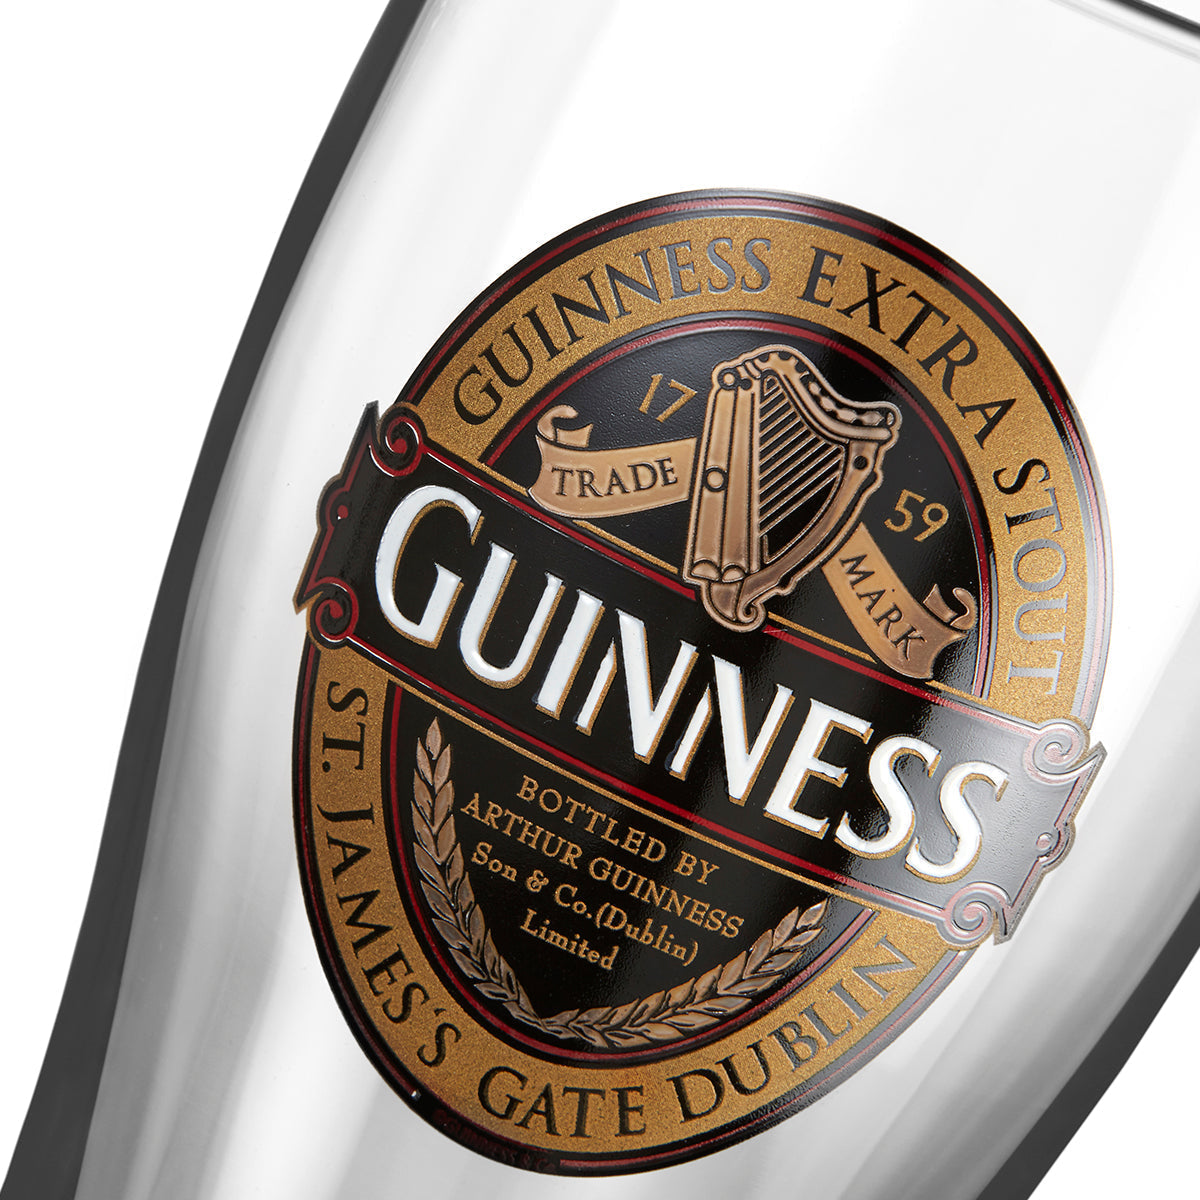 Limited edition Guinness Classic Collection Pint Glass - 24 Pack featuring the iconic Guinness UK logo.